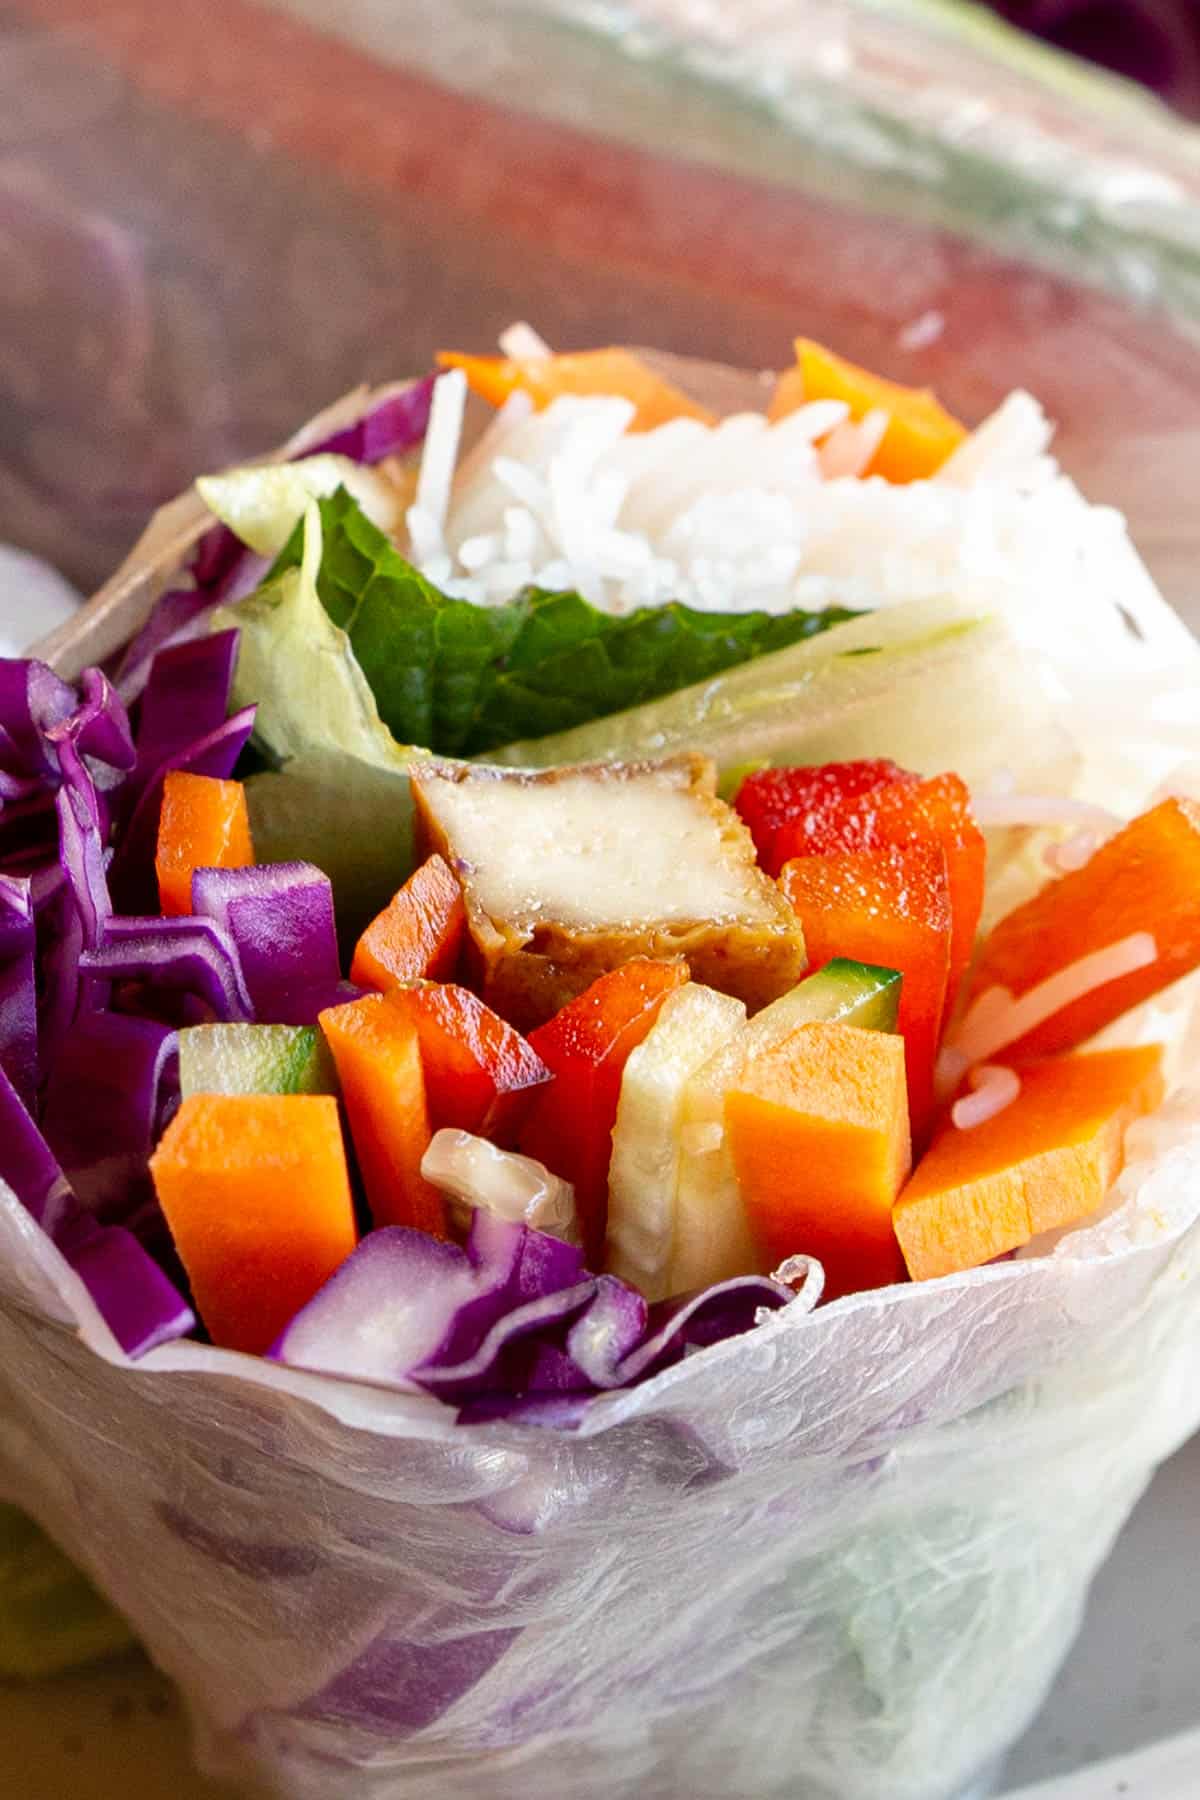 Half a rice paper roll stuffed with vegetables and tofu.